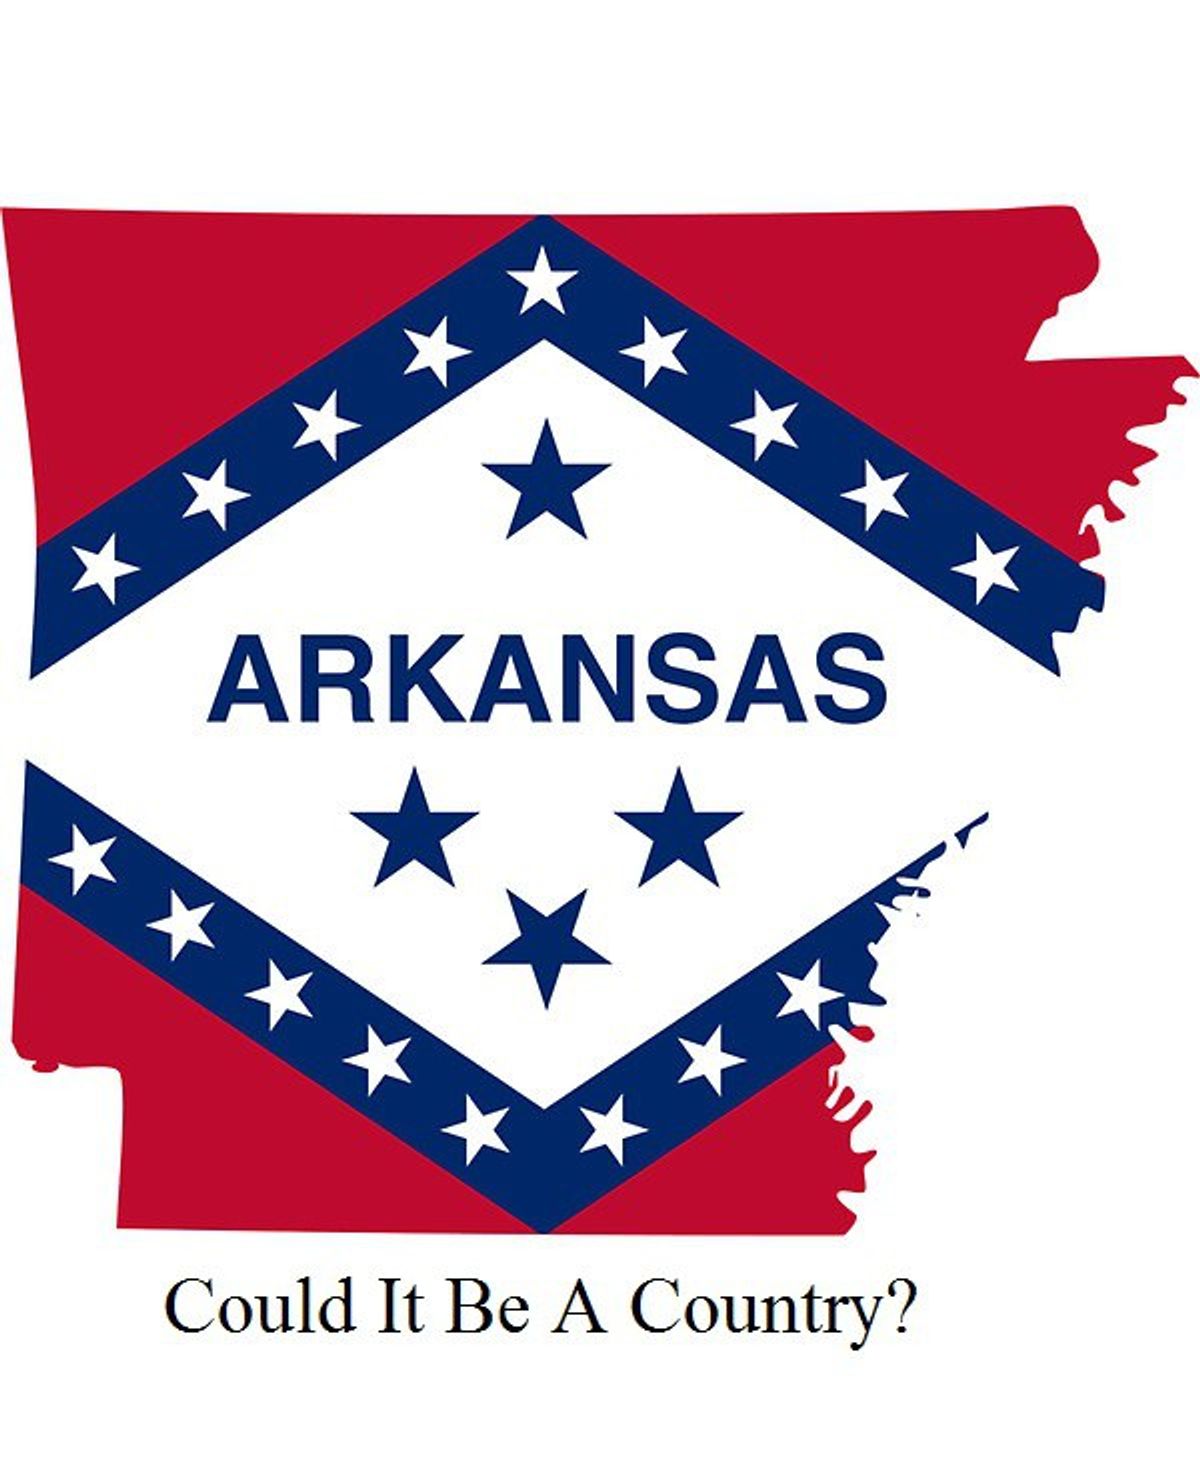 Could Arkansas Be A Country?